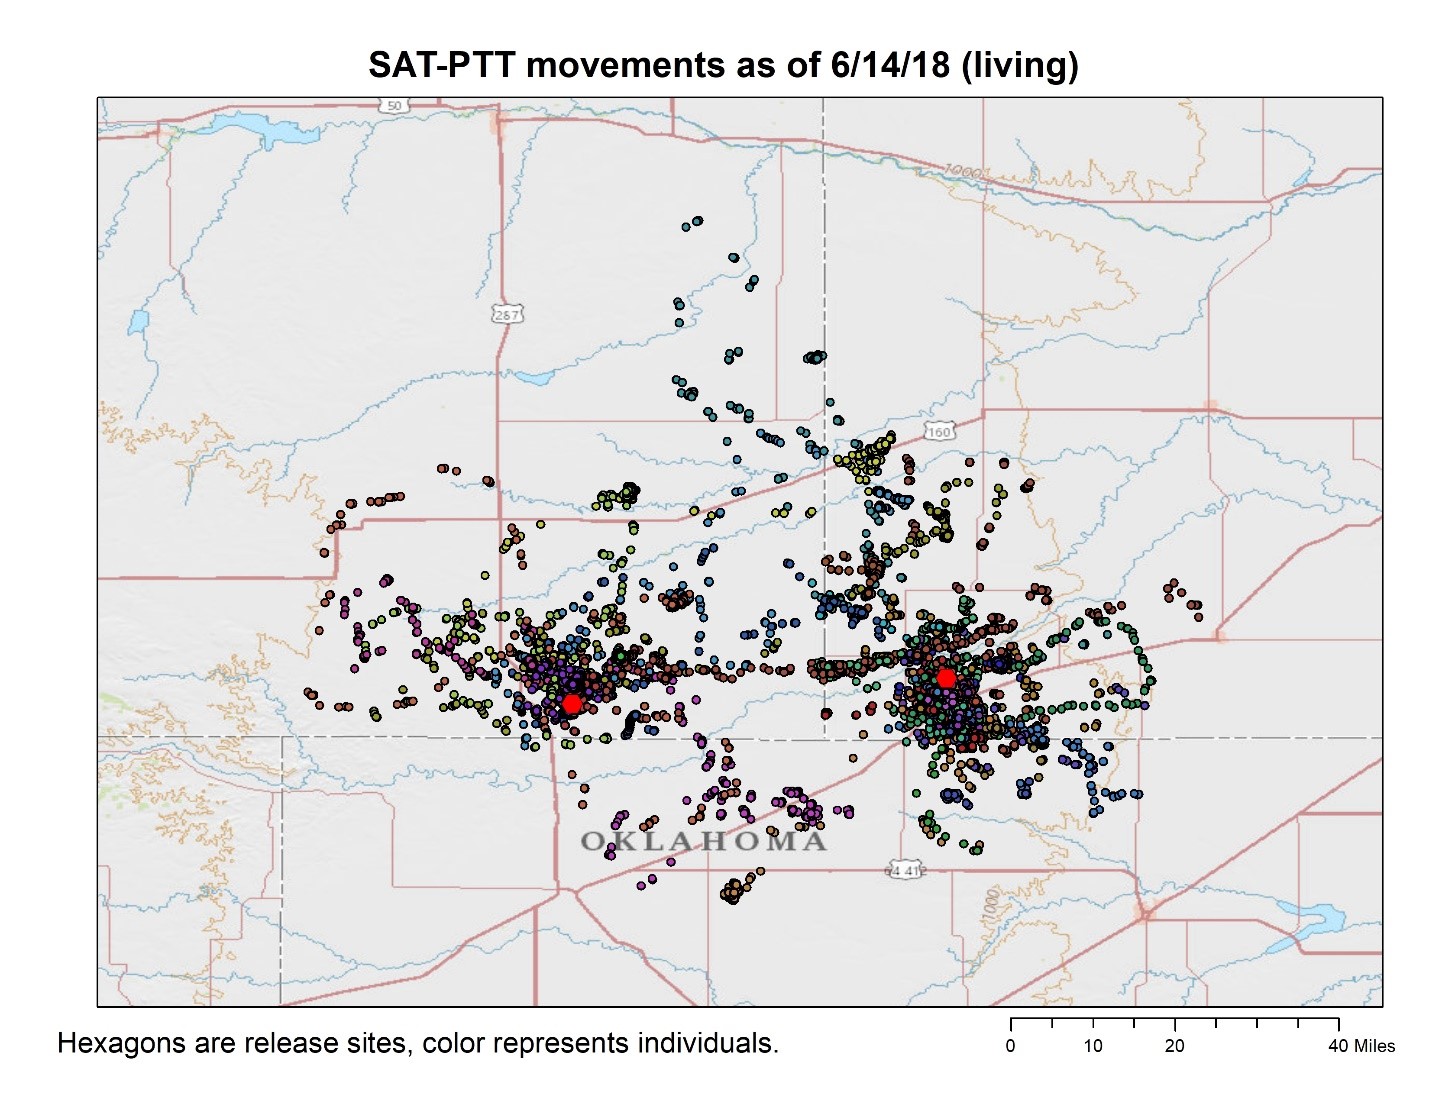 Living SAT-PTT movements as of 6/14/2018